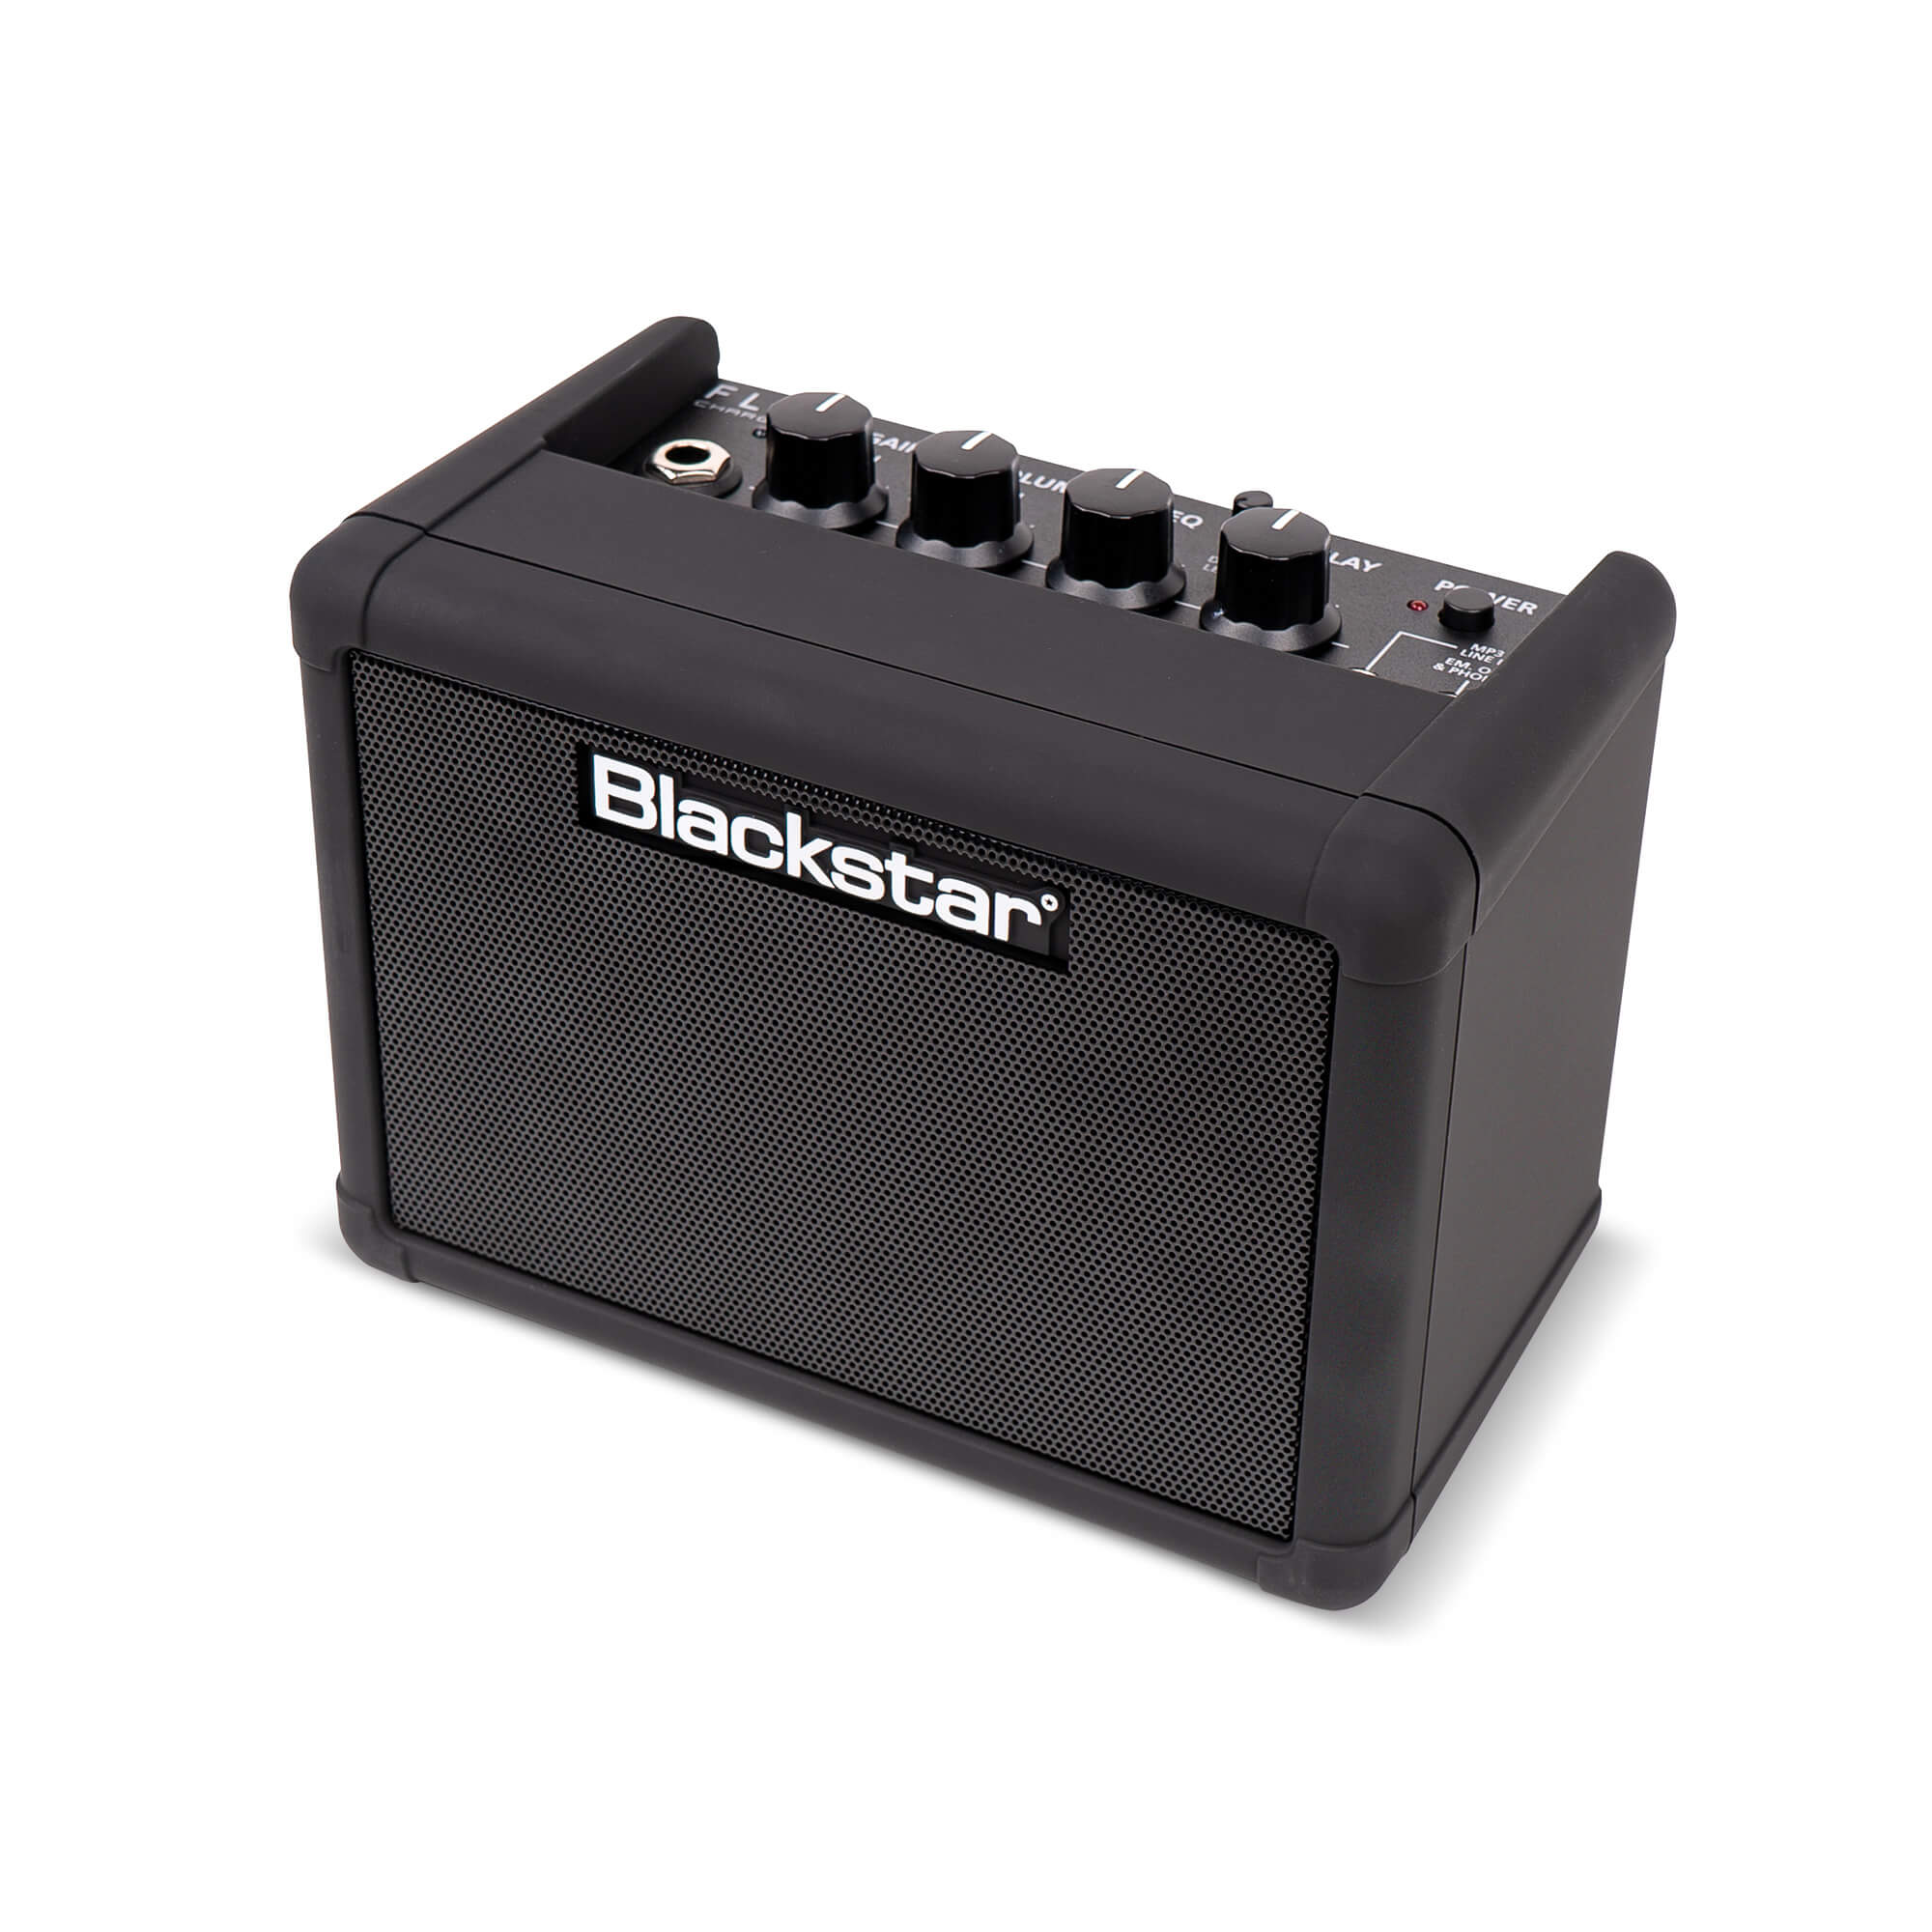 Blackstar Amps FLY 3 Charge mini guitar amplifier right